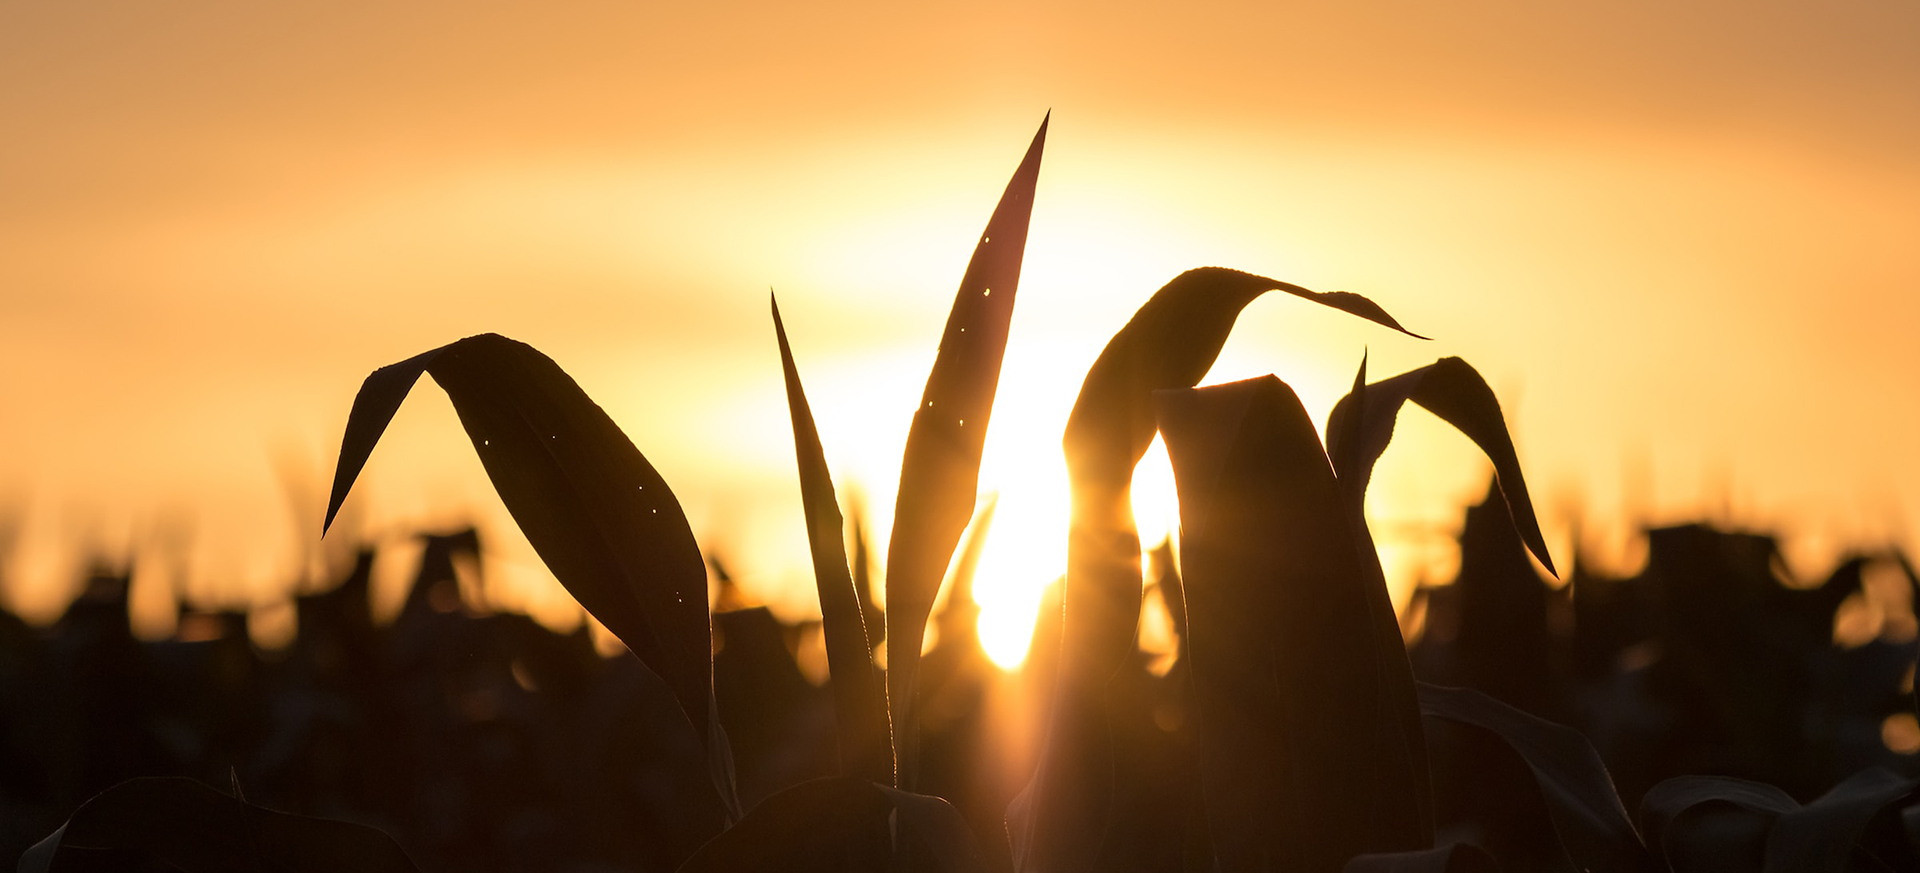 A sunset against a silhouette of a cornfield